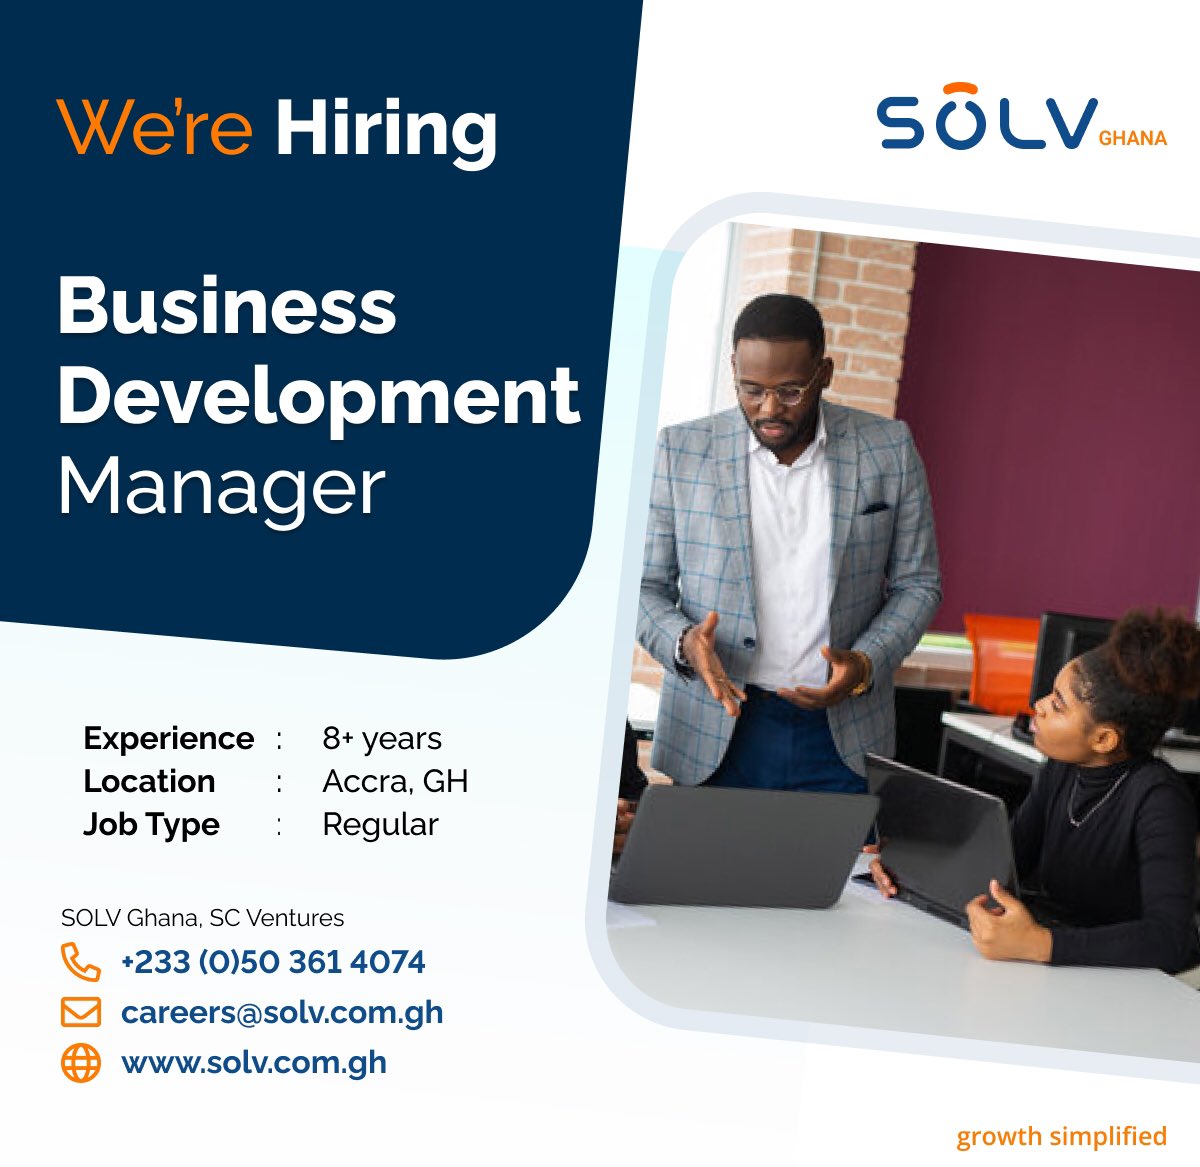 The #SOLVers are expanding!

If you’ve a talent for identifying growth opportunities & building strong relationships, we want you to join our team

Apply now and drive our success forward
#SOLVGhana #GrowthSimplified #Careers #BusinessDevelopmentManager #NowHiring #BecomingSOLVer